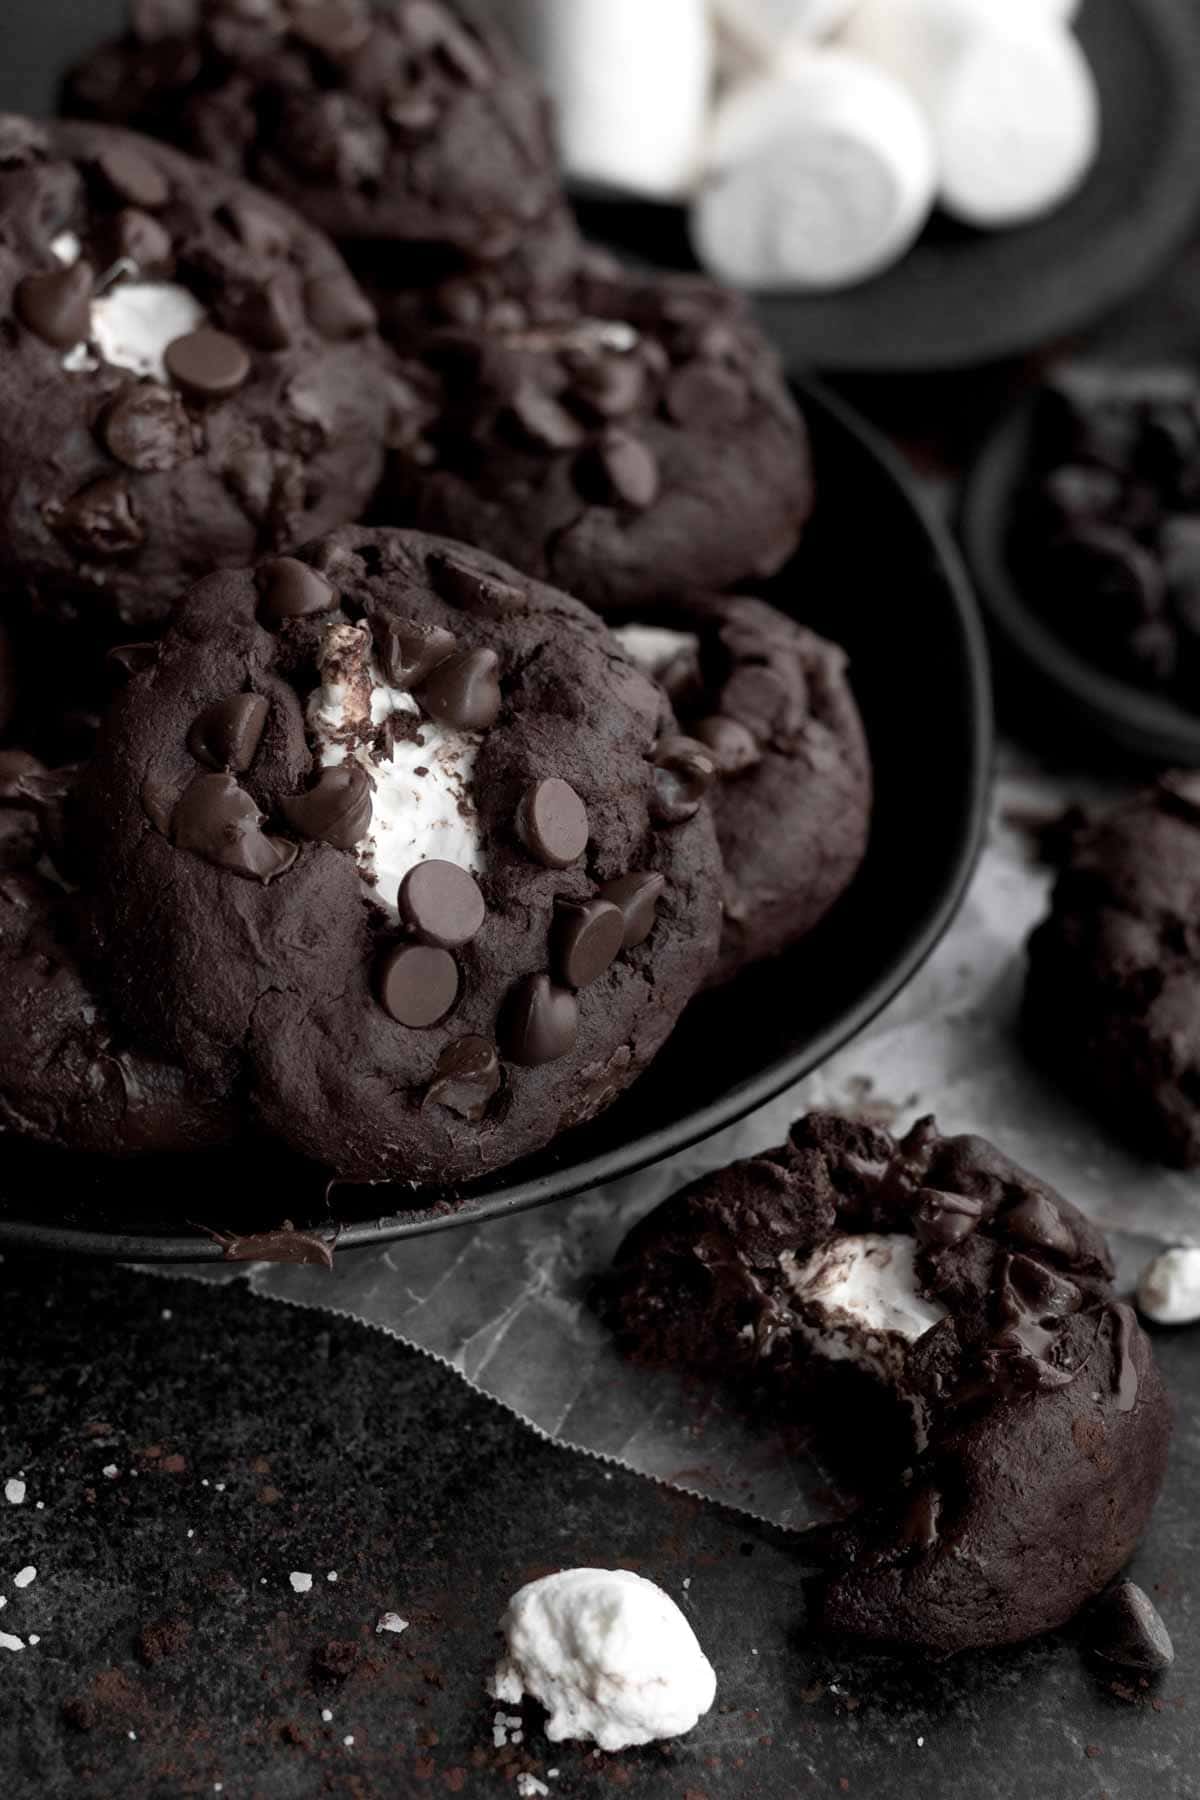 A plate of gluten free chocolate marshmallow cookies sits seductively.